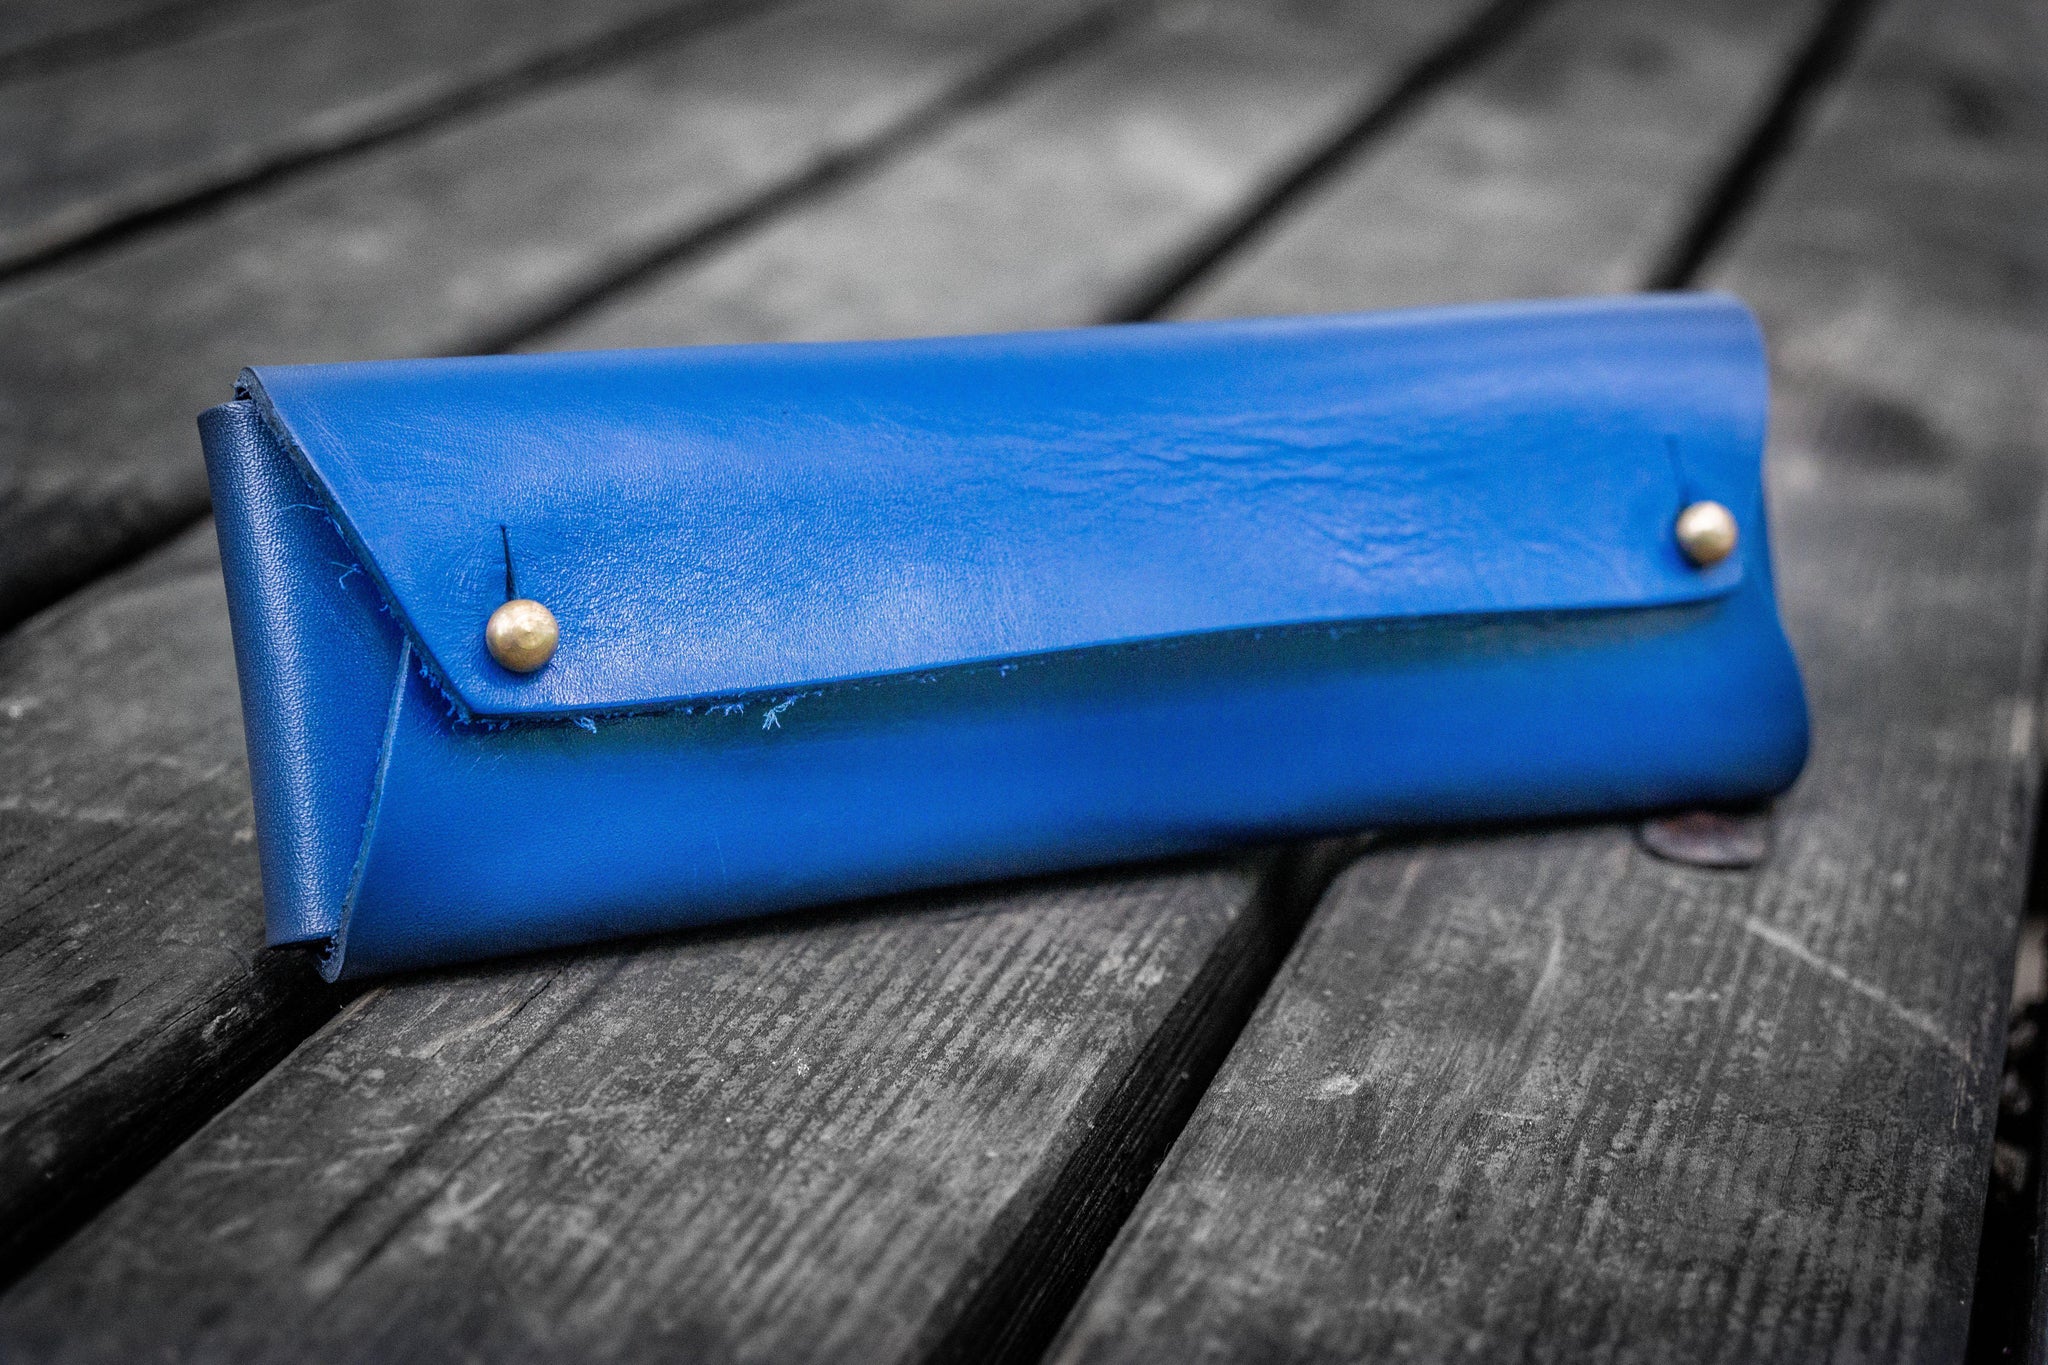 100% Handmade Student Leather Pencil Case - Galen Leather